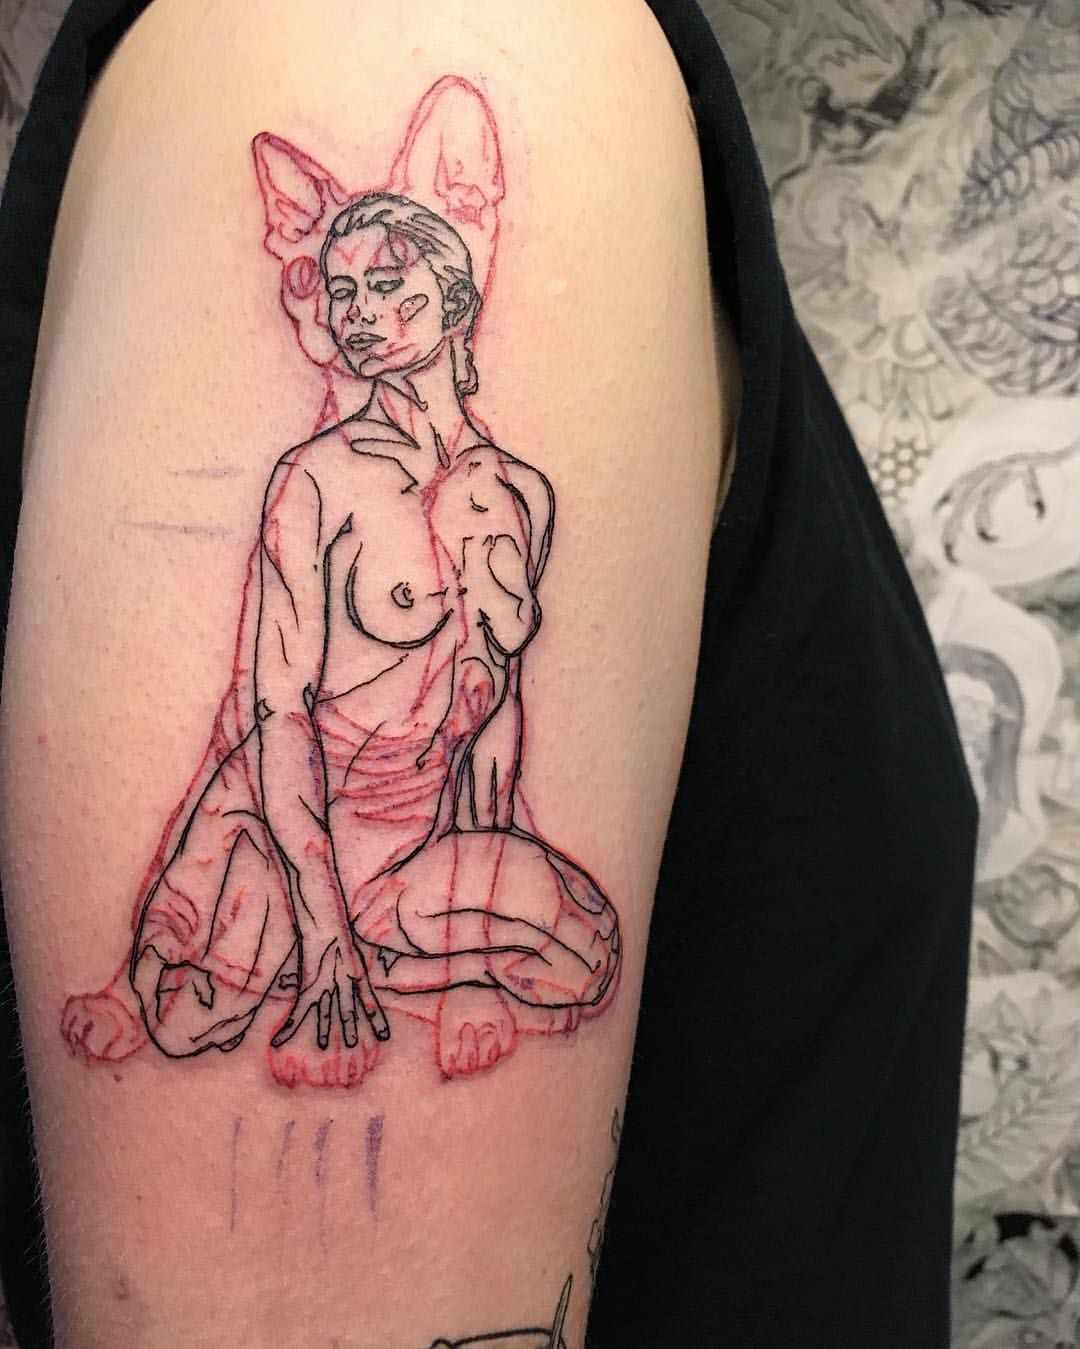 Combining Black and Straight Tattoos - Sick Woman With Cat In Background